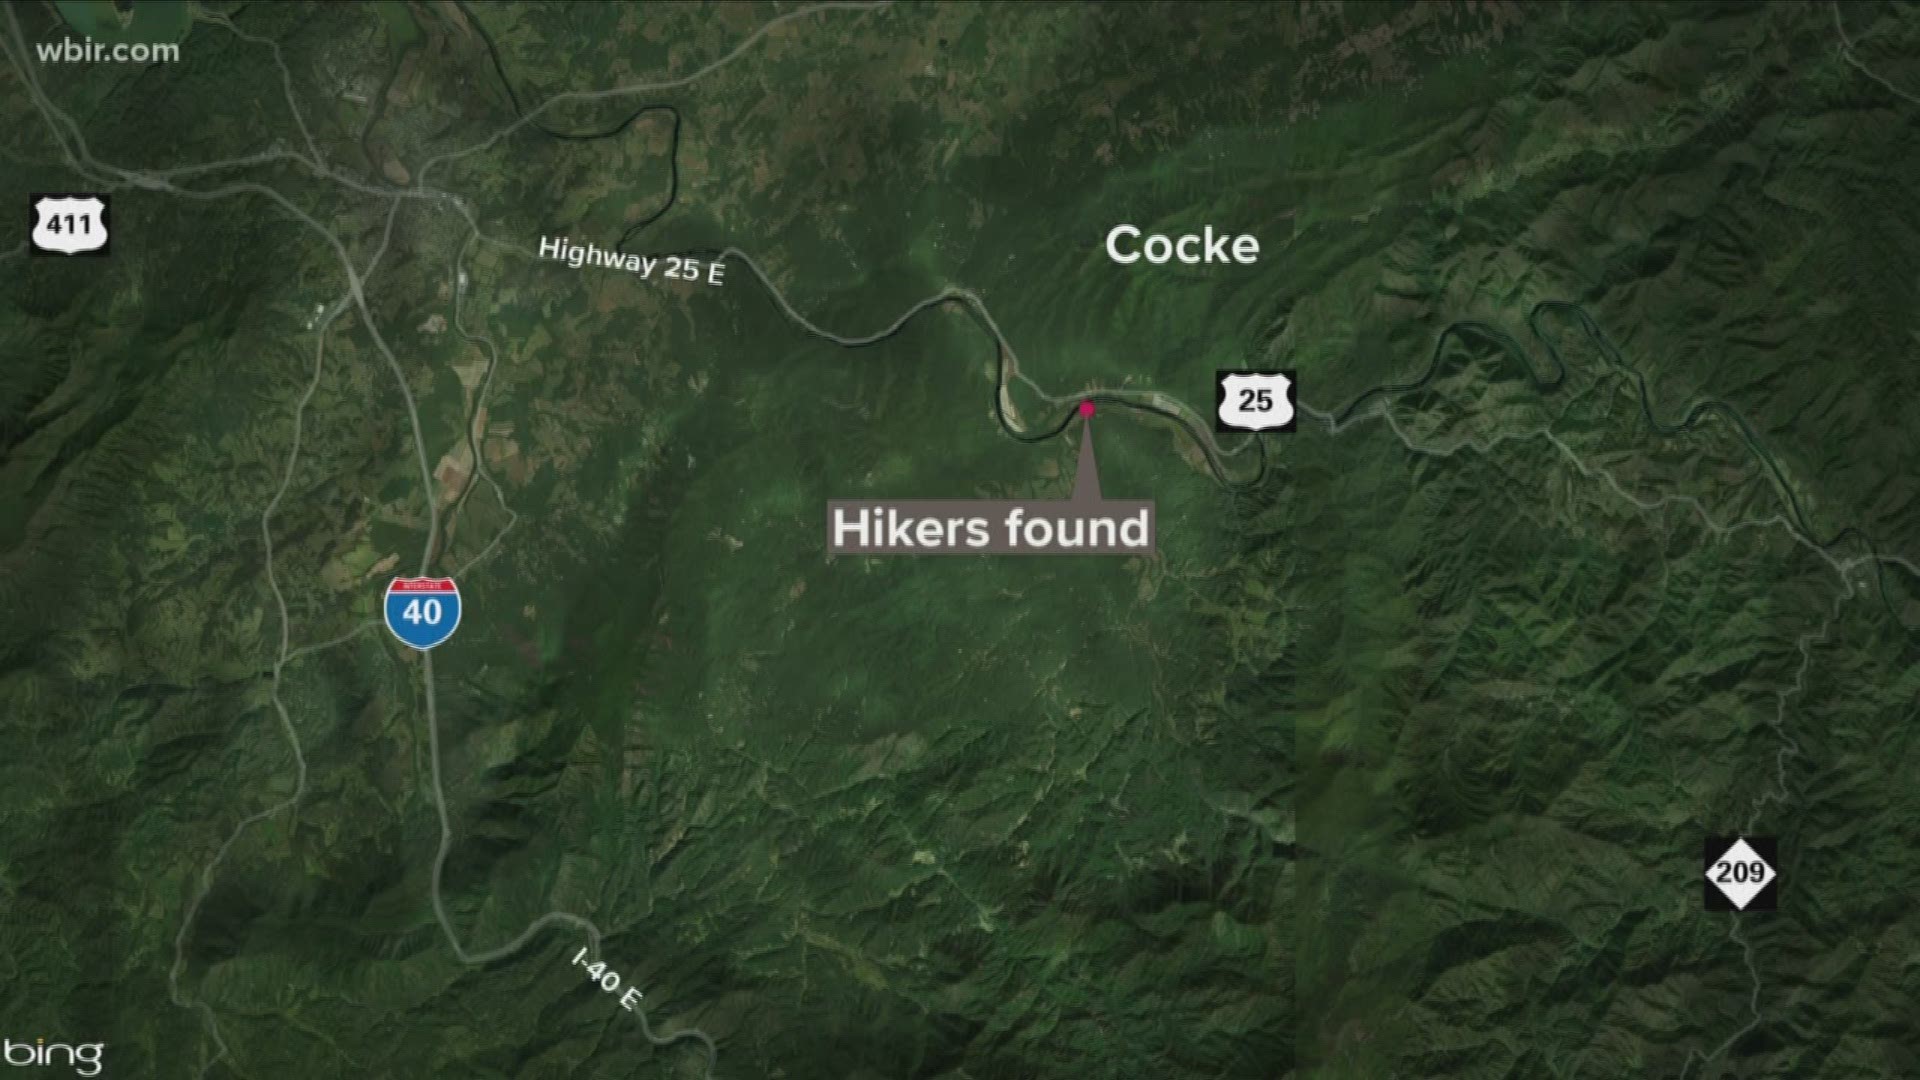 Just before midnight Monday, Cocke County EMA said both hikers were found in excellent condition despite freezing temperatures.